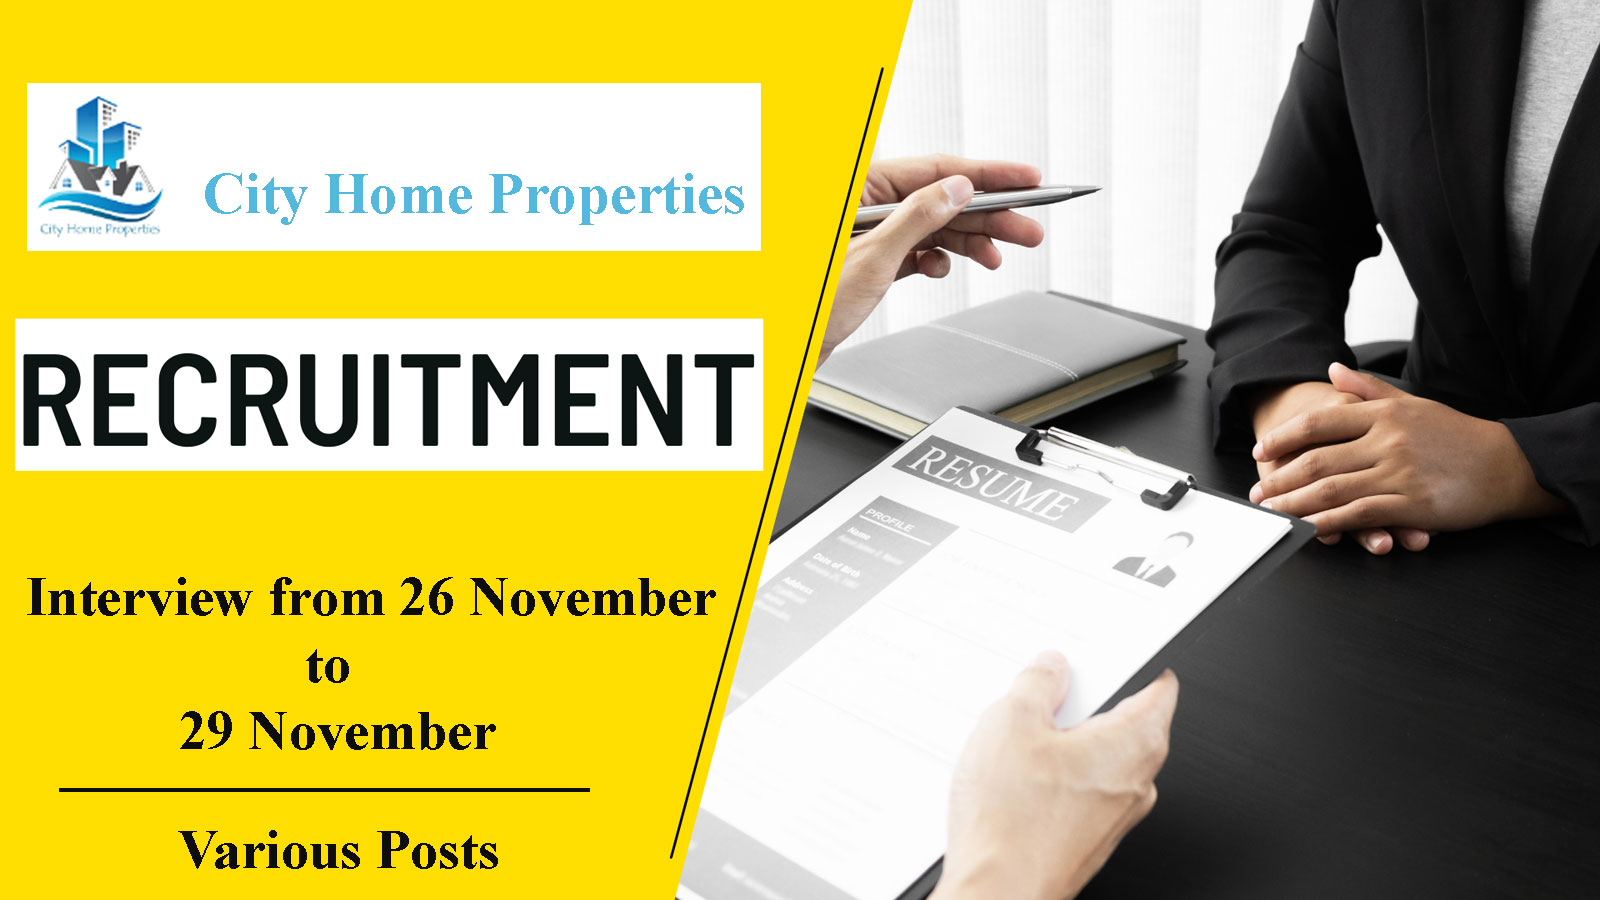 City Home Properties Recruitment, Interview from Nov 26 to 29